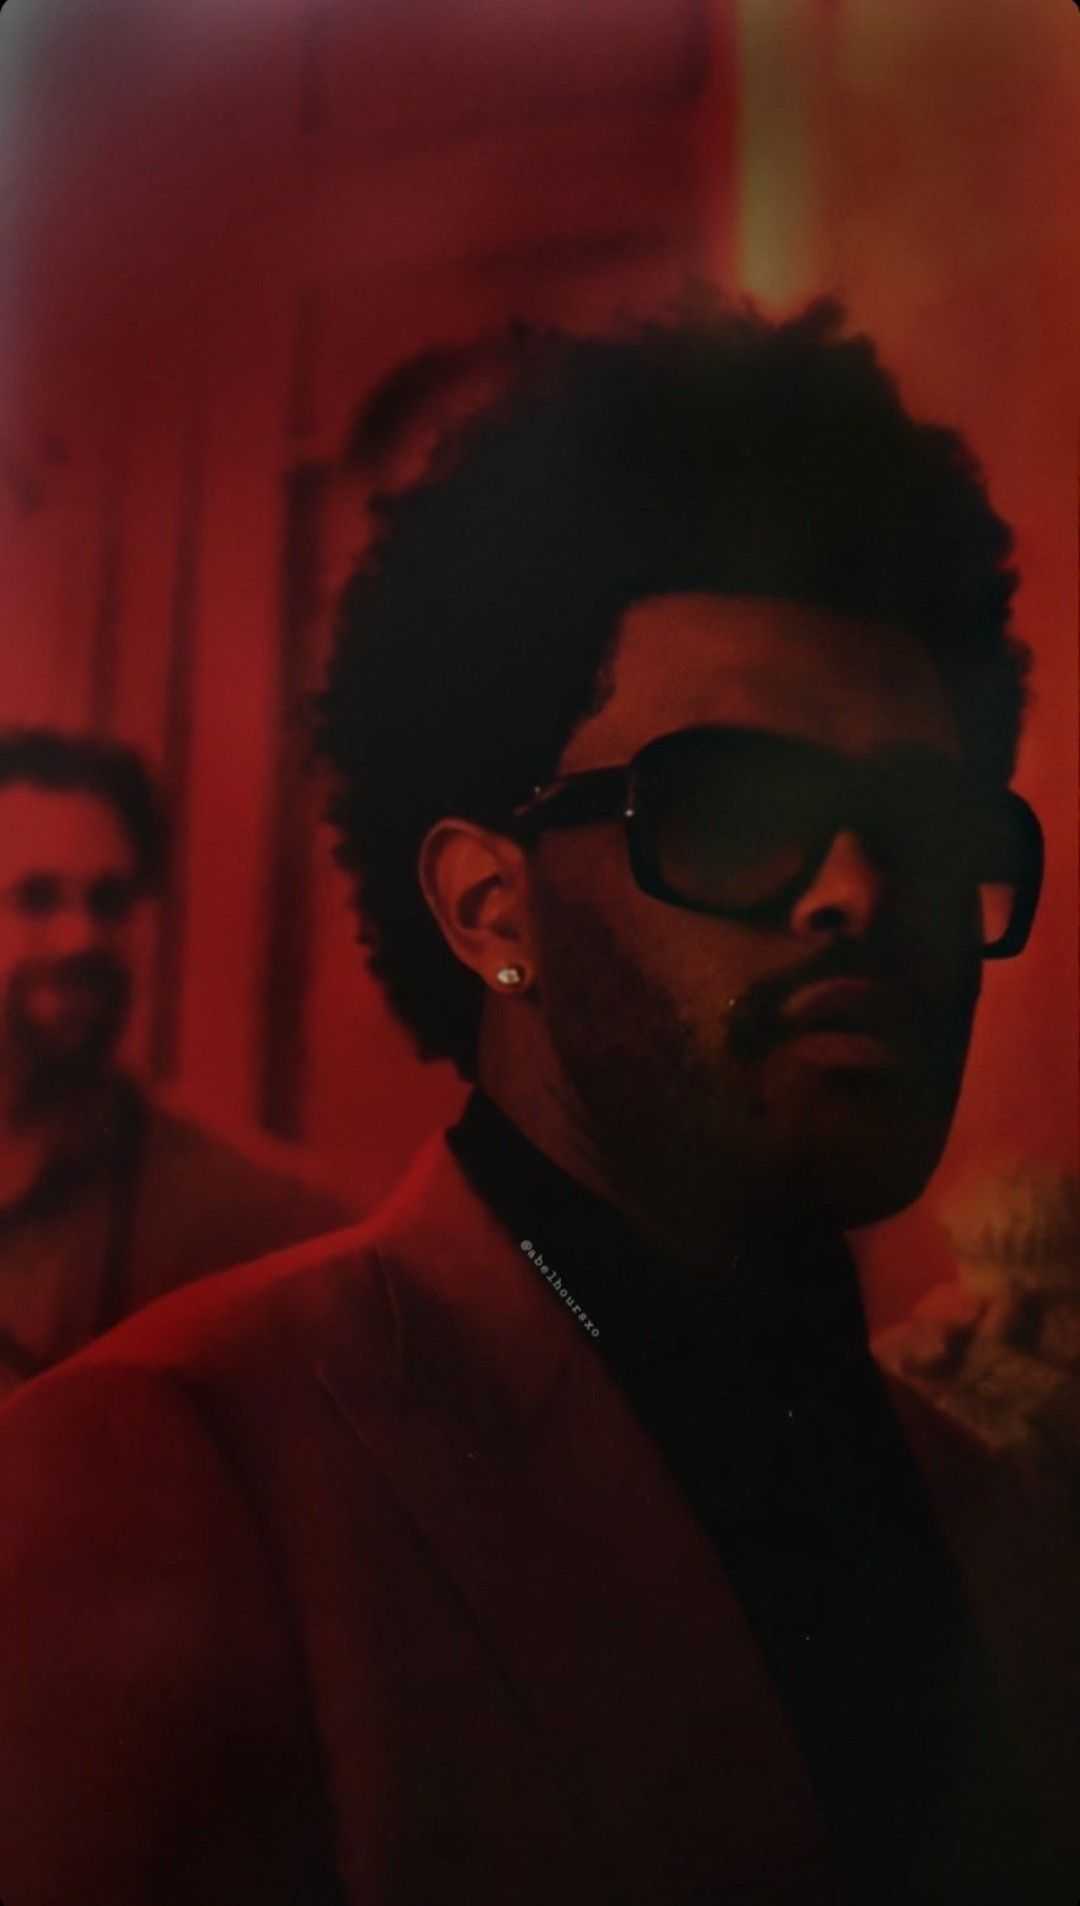 A man with an afro and sunglasses - The Weeknd